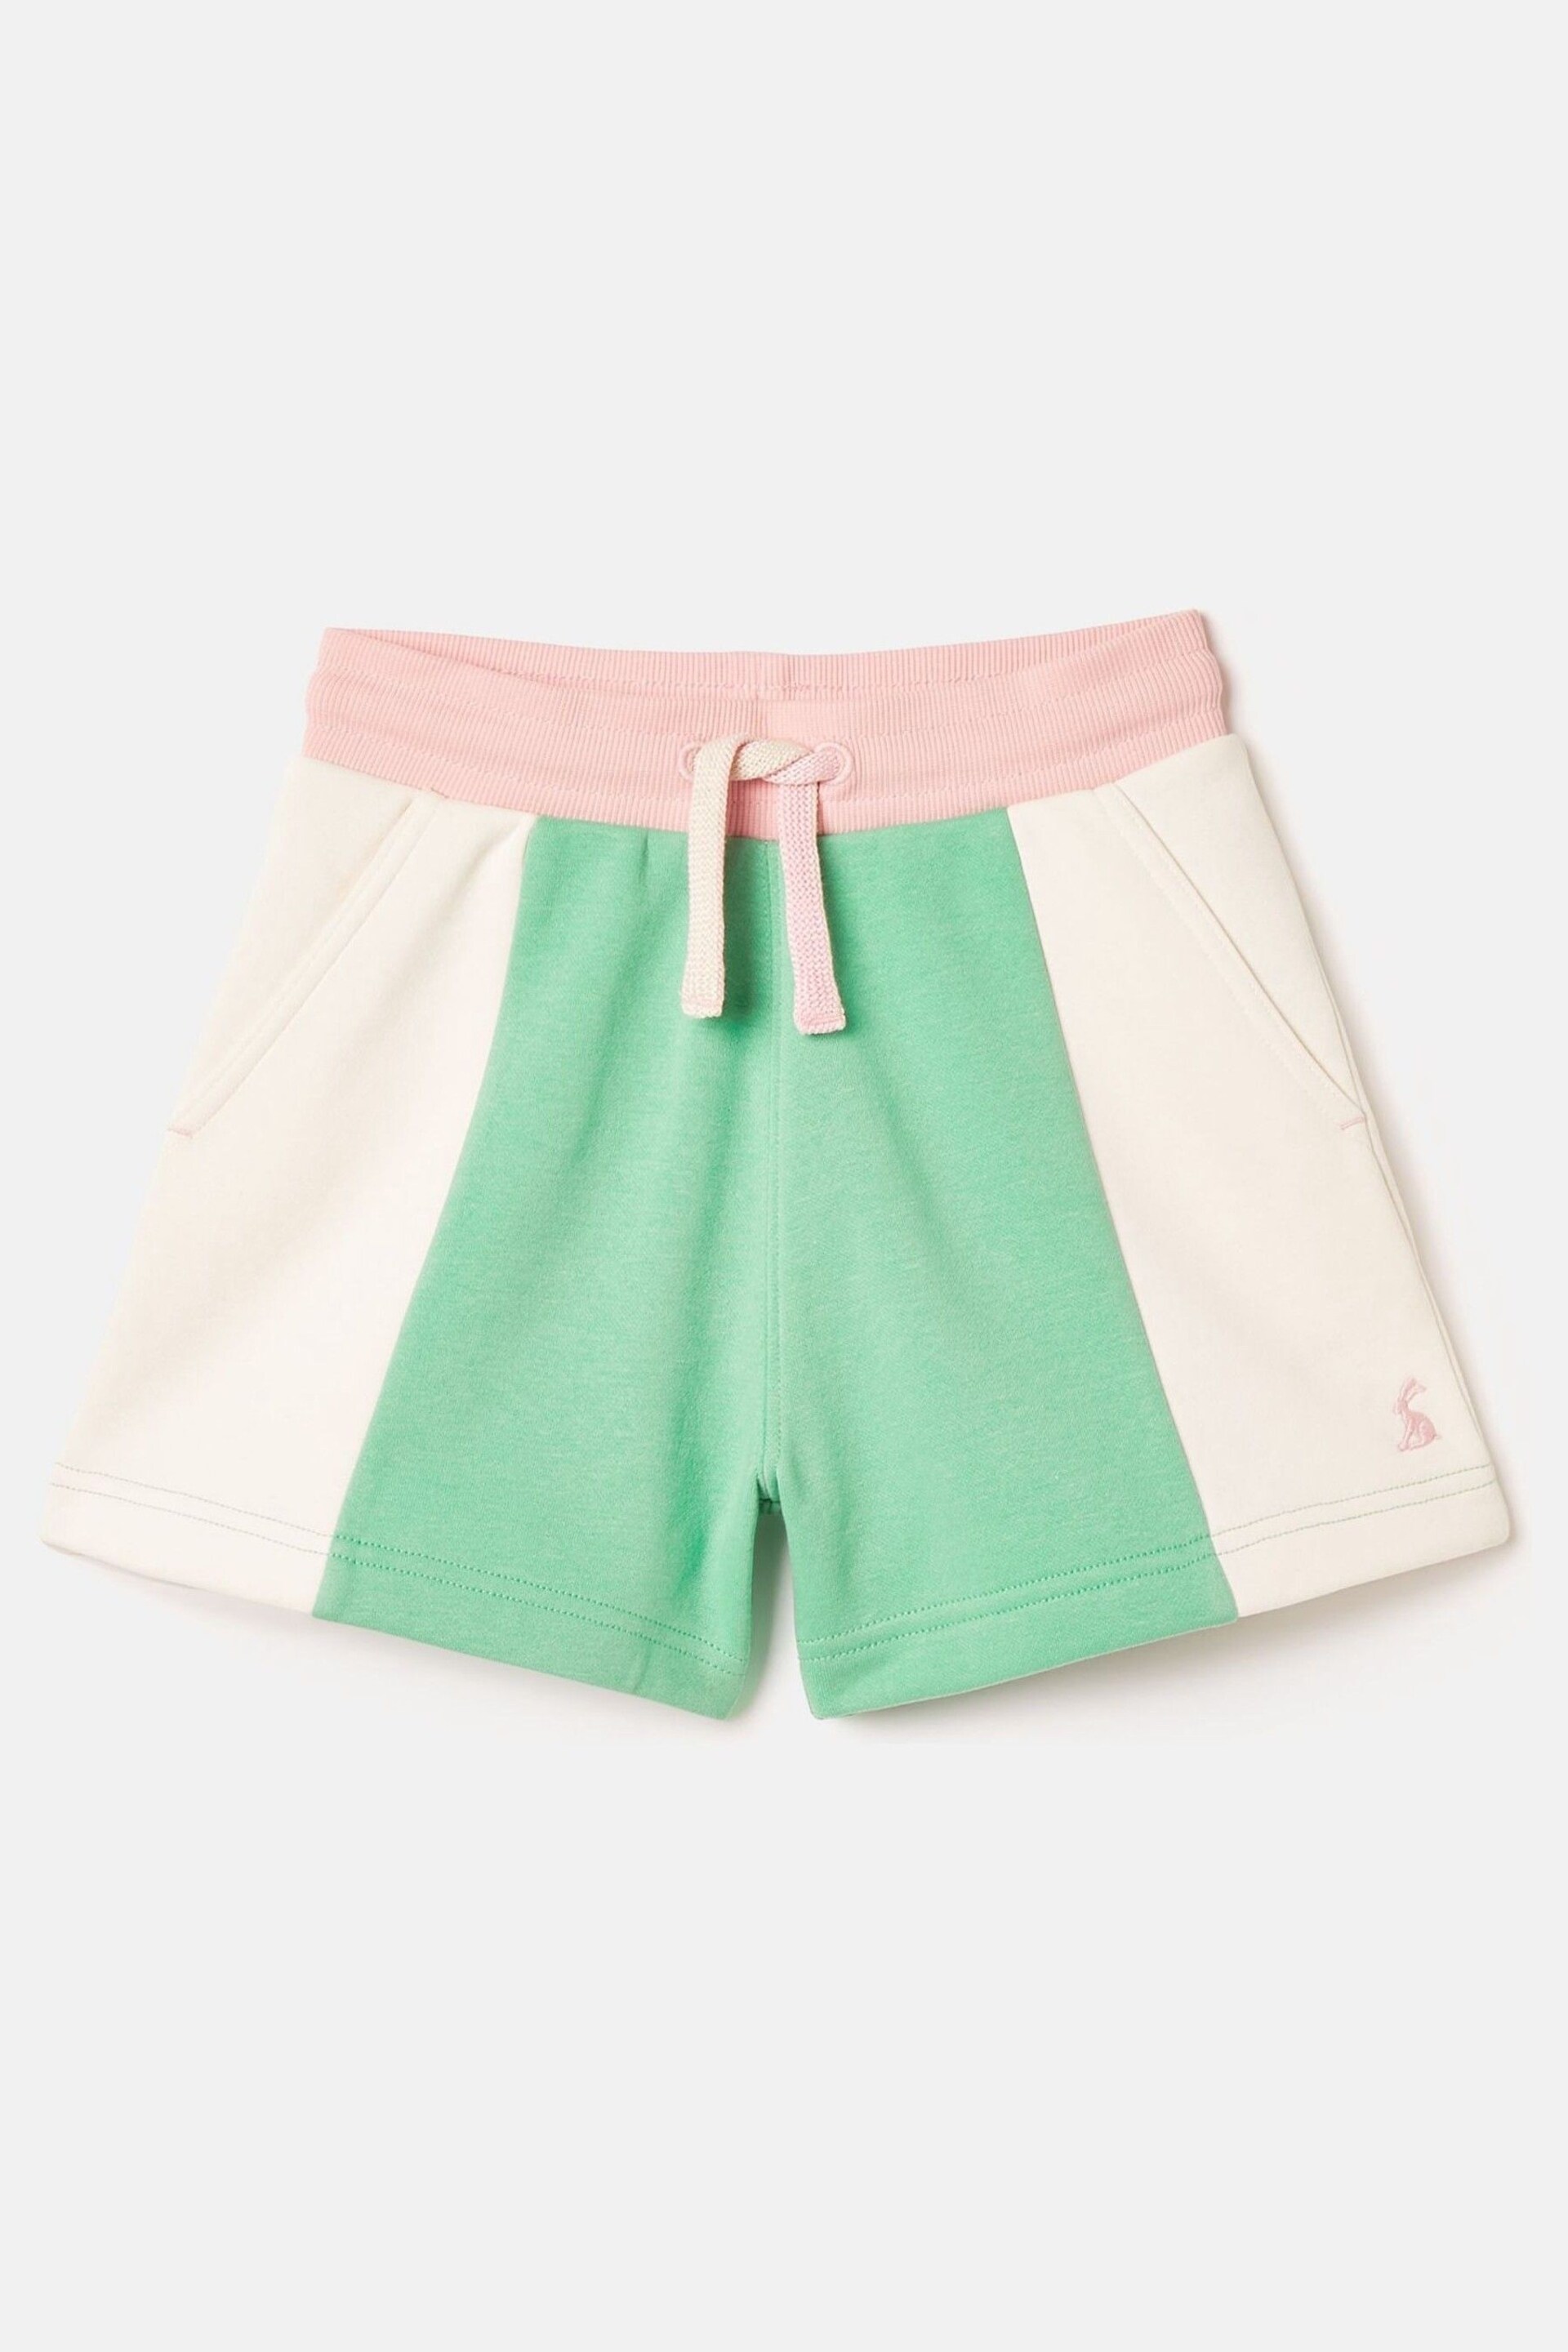 Joules Pippa Green Colour Block Jersey Shorts - Image 5 of 8